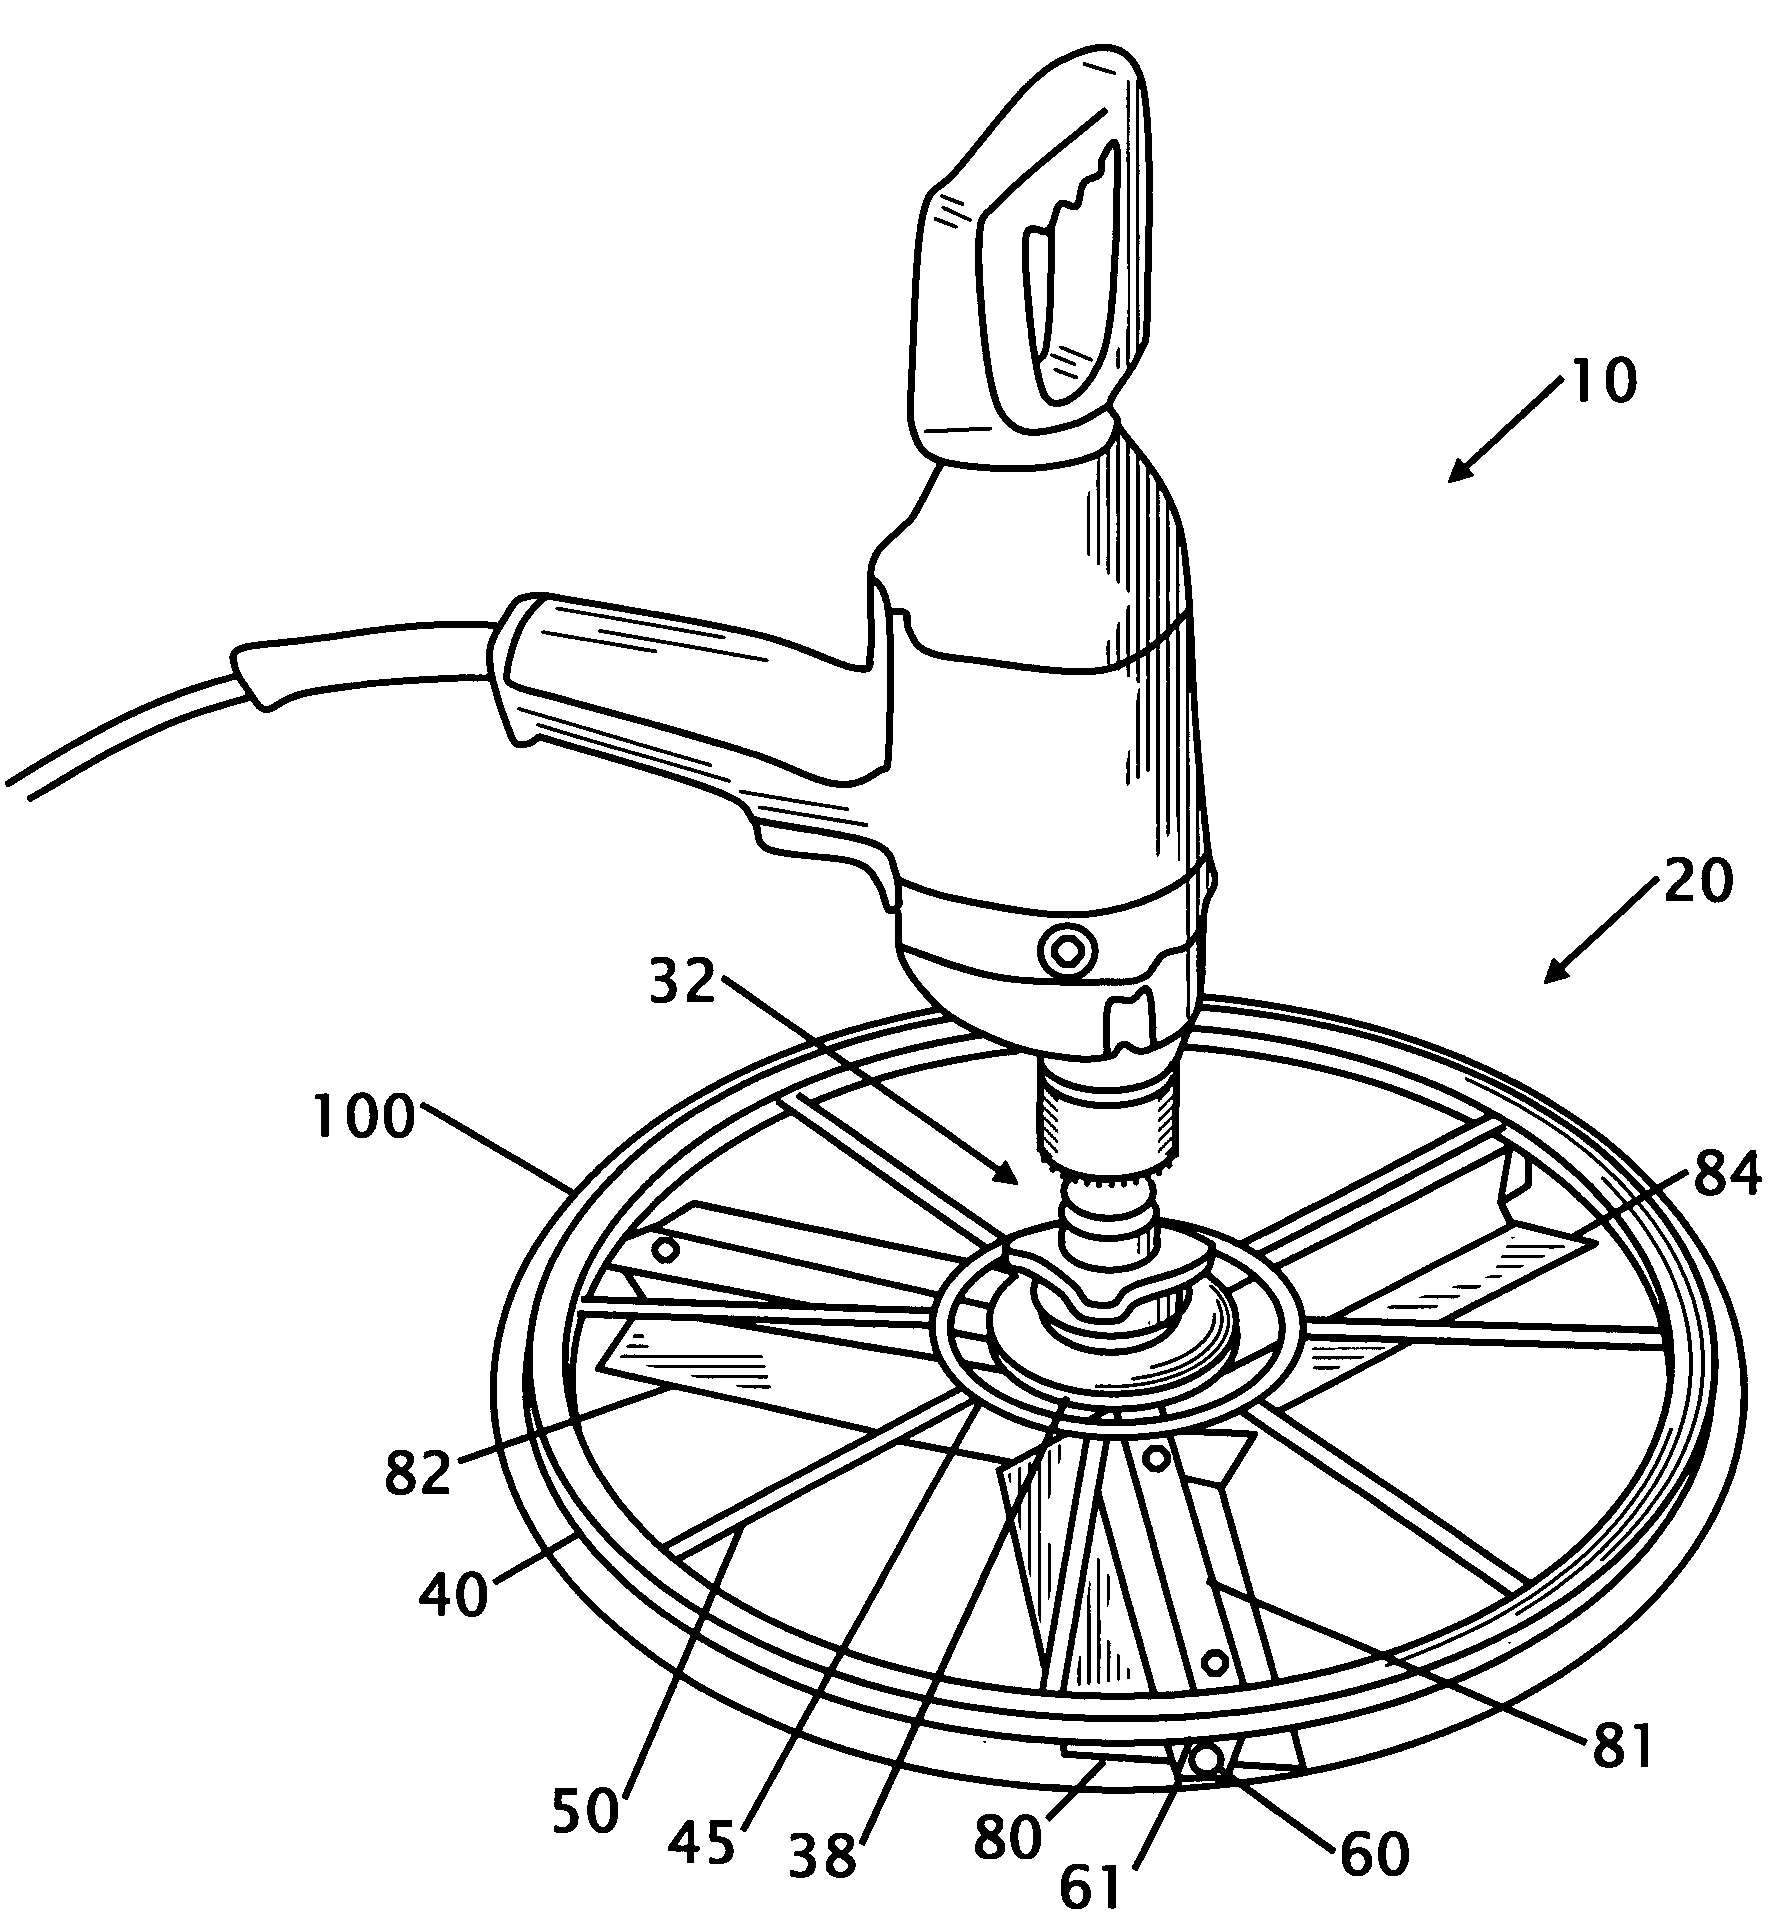 Power trowel attachment for a drill